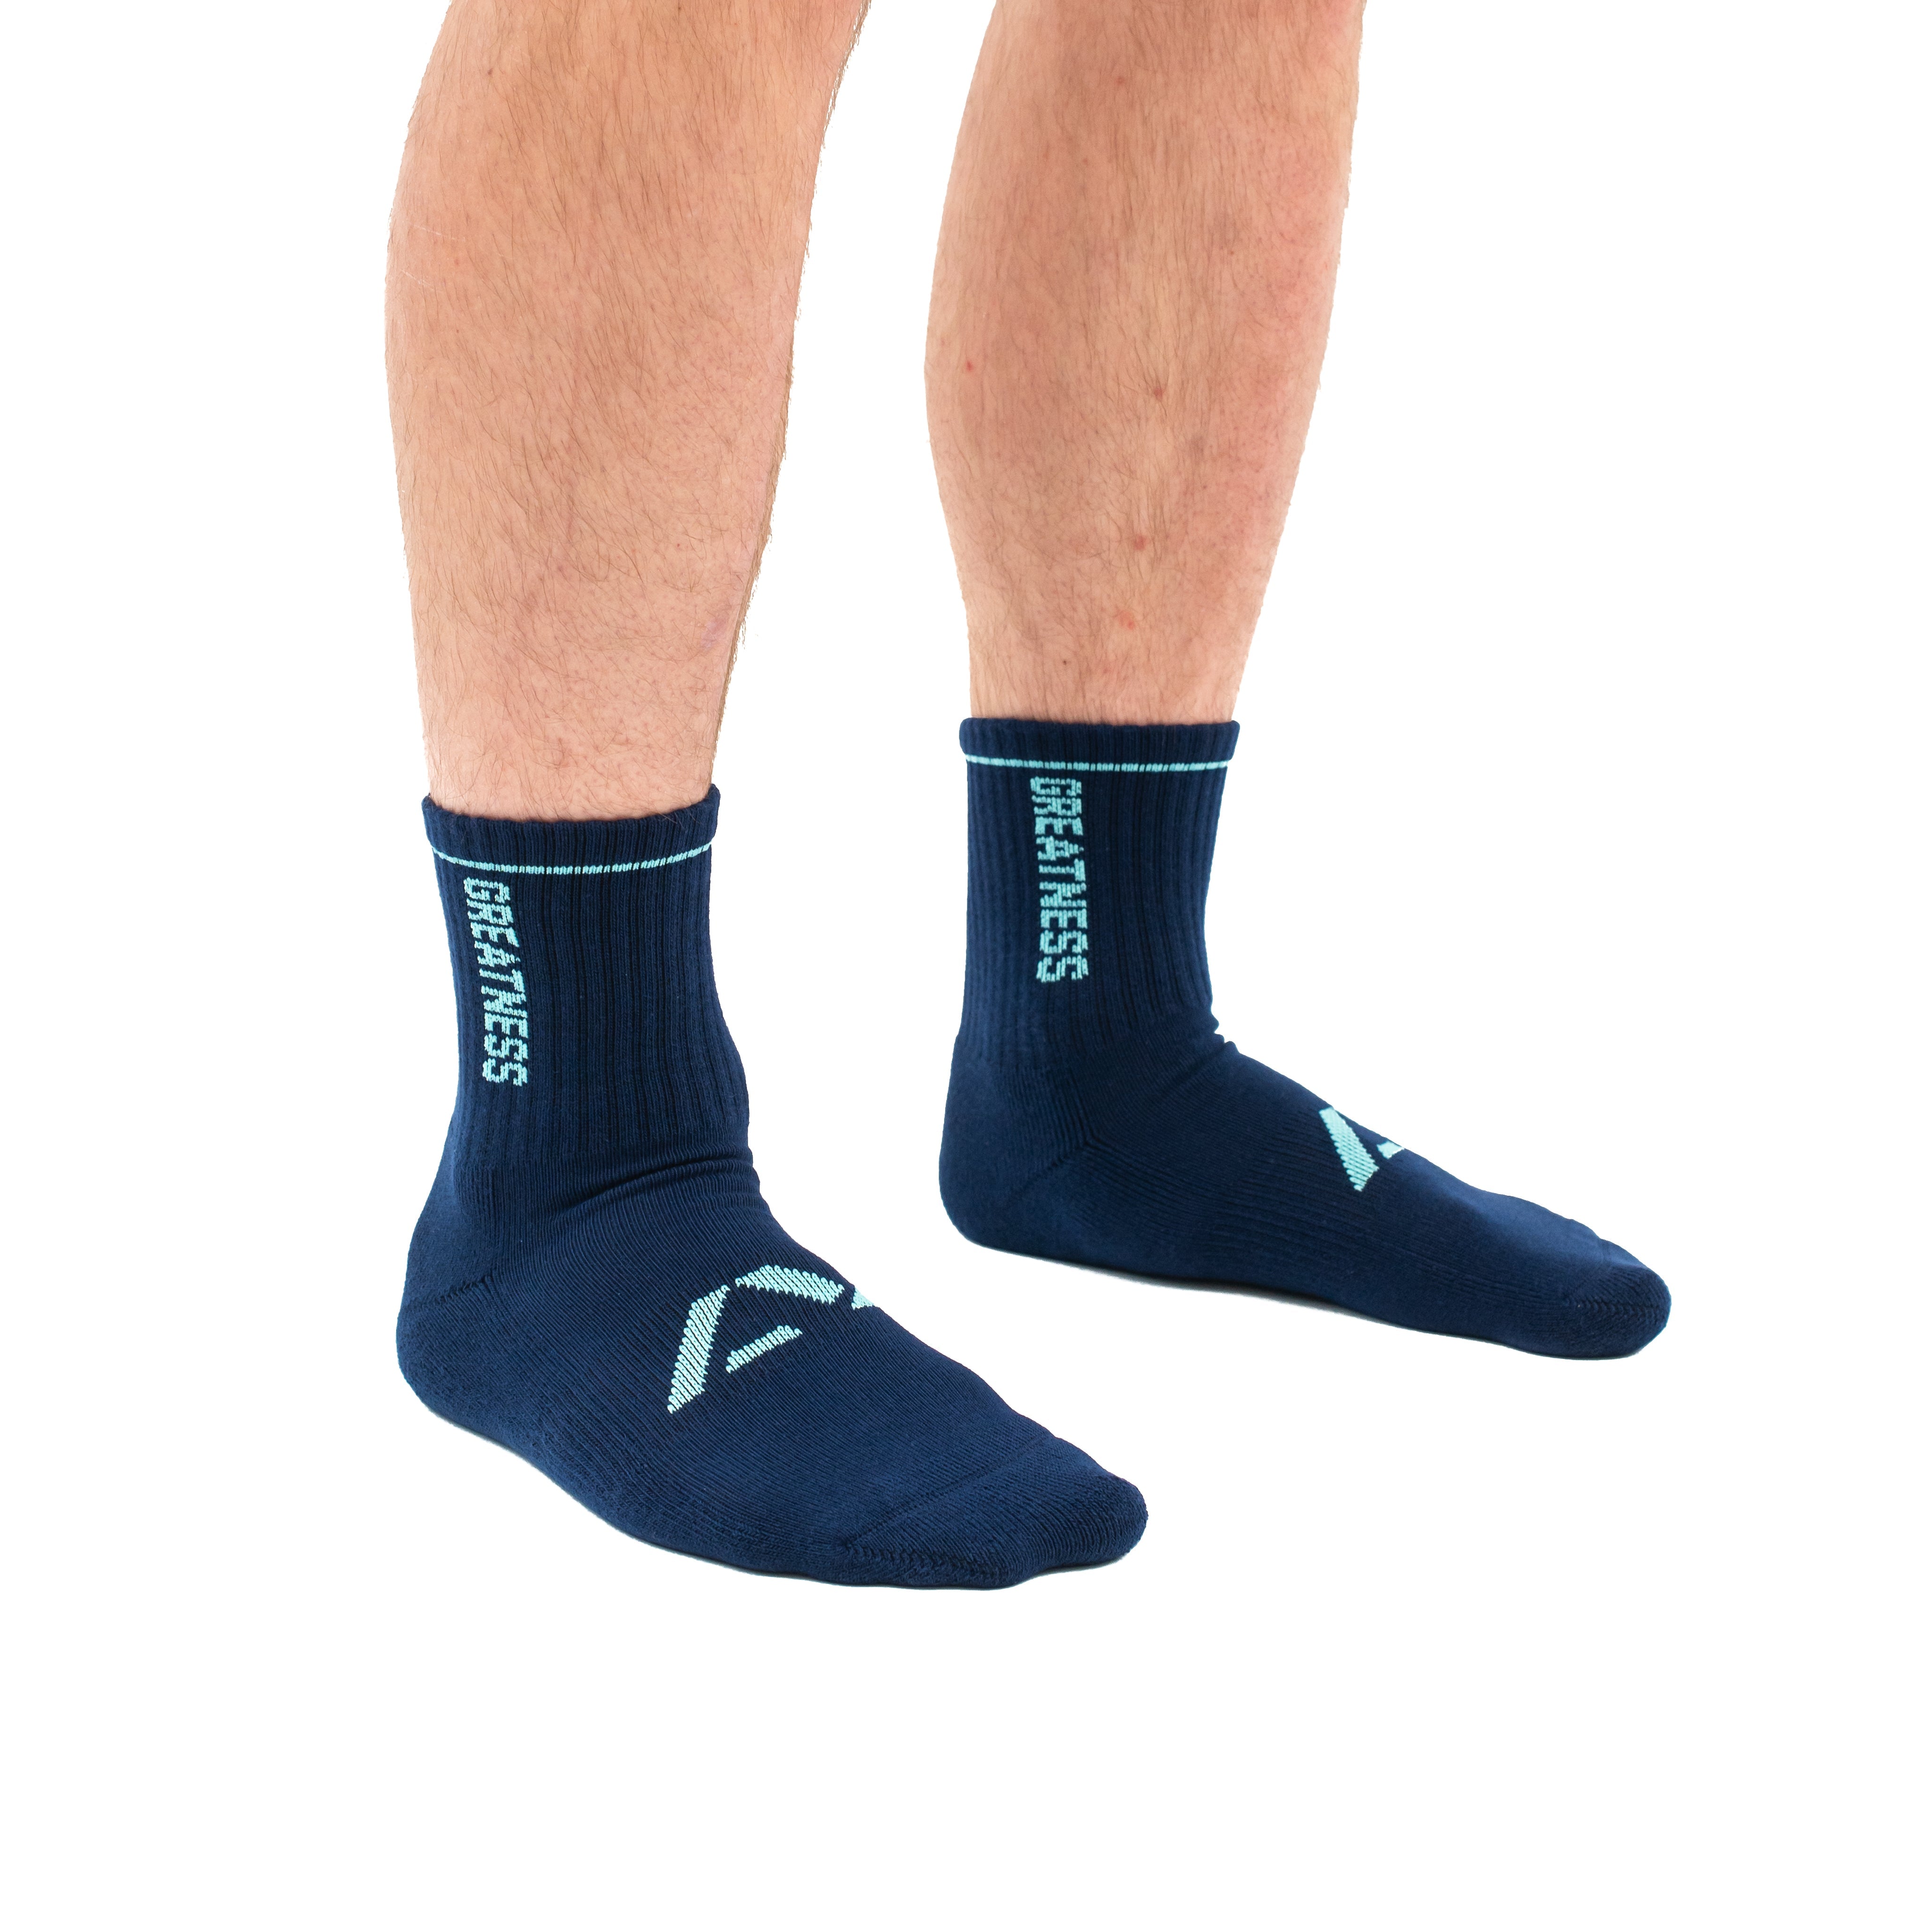 Your feet are important and durable crew socks are just as importing when out and about or in the gym. These Iced crew socks have a cushioned footbed, arch support and light compression of the ankle. A7 Crew socks are IPF Approved so a great addition to your IPF Approved Kit. A7 Crew socks shipping to Europe and the UK, Norway, Switzerland and Iceland.